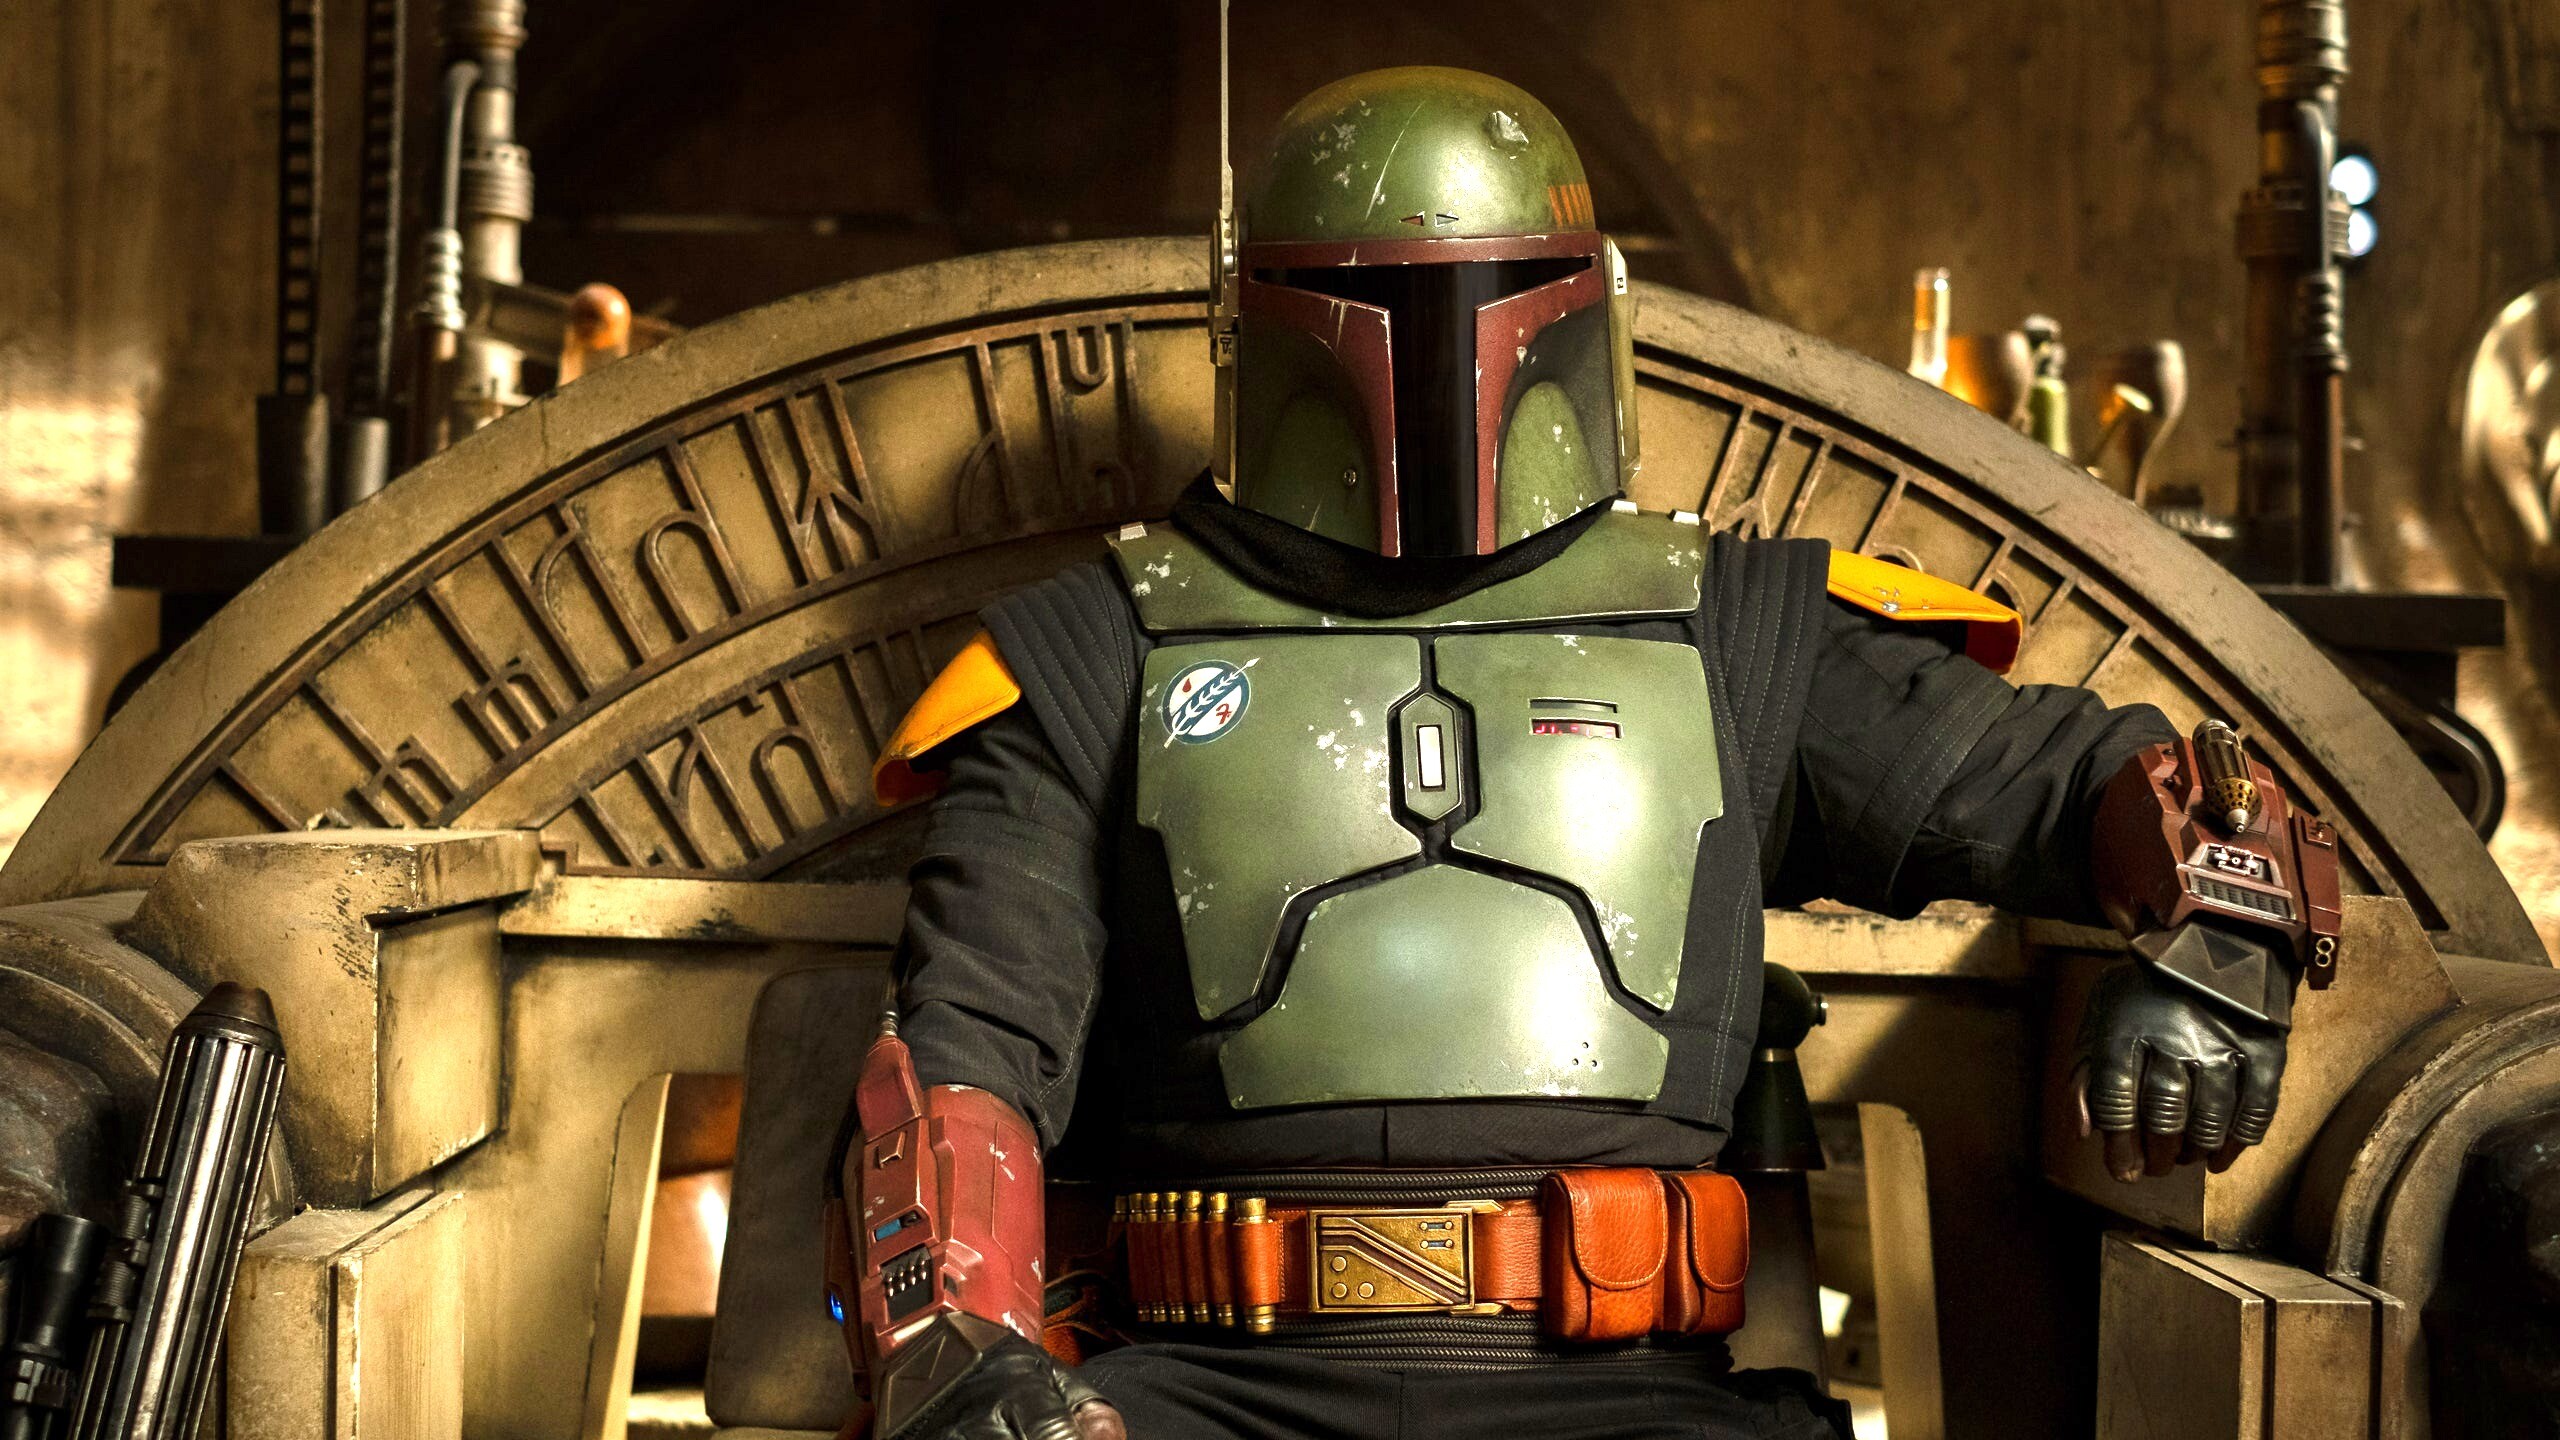 The Book of Boba Fett: A spin-off of the acclaimed Star Wars show The Mandalorian. 2560x1440 HD Background.